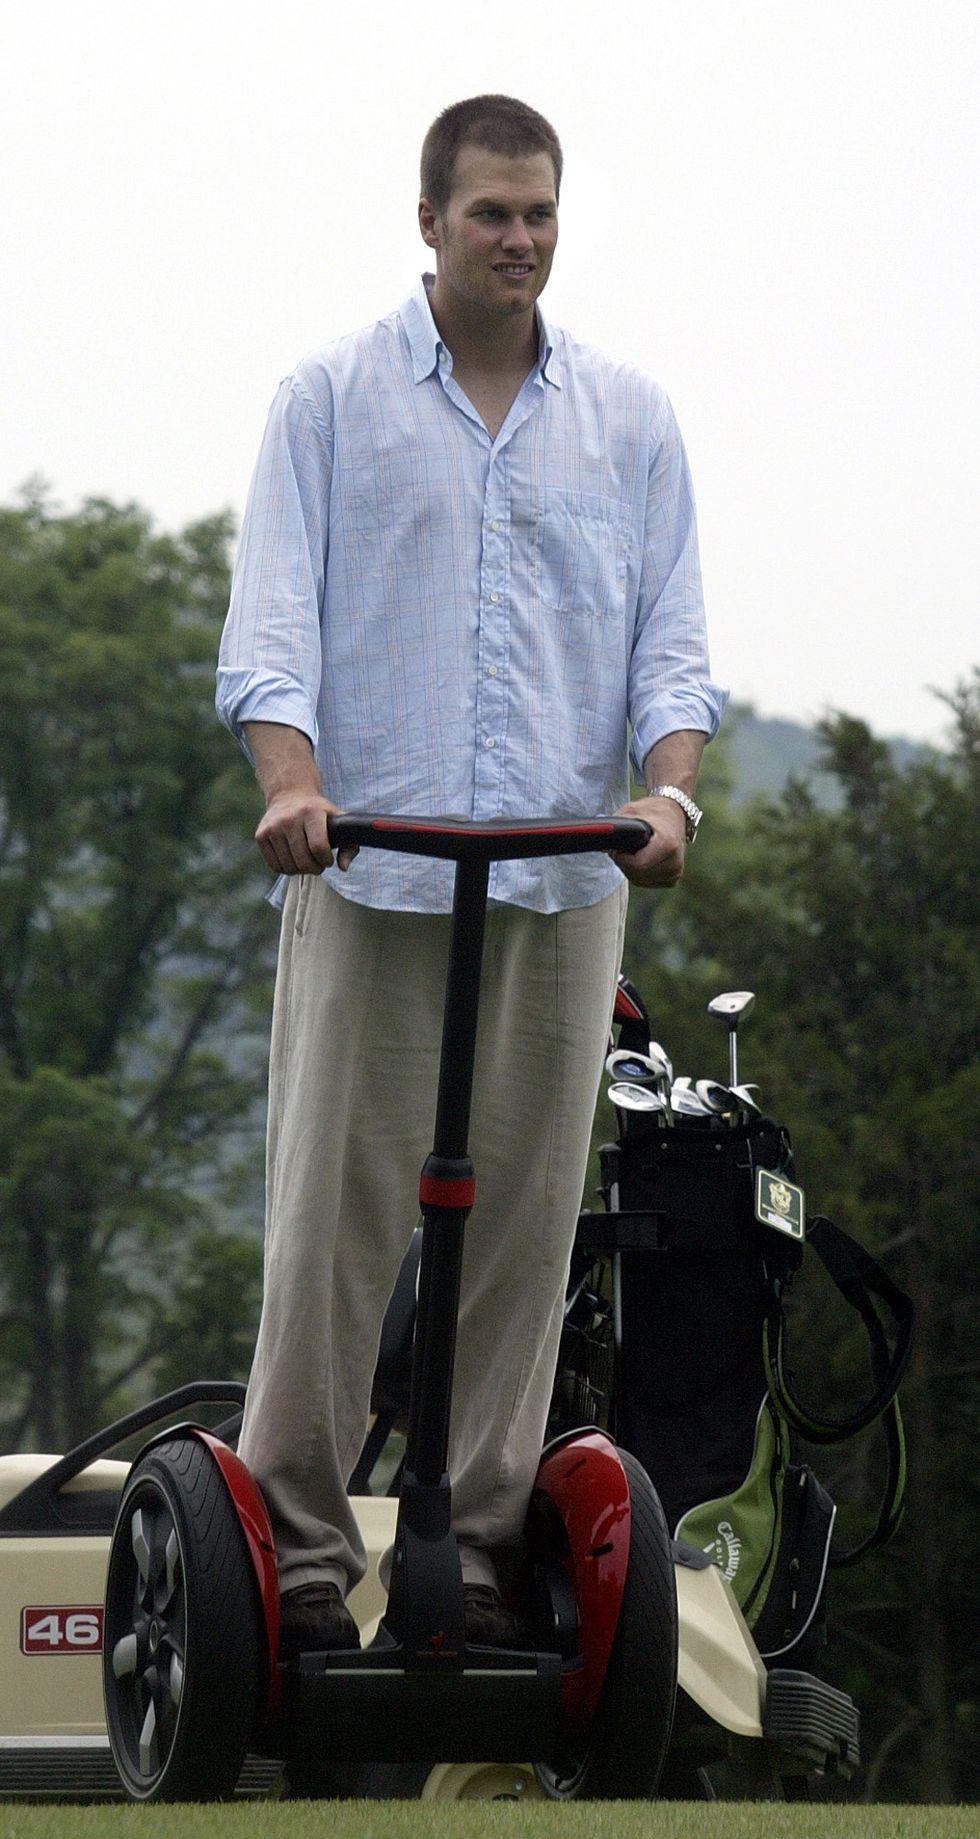 061305 belmont,mathe new england patriots charity glof tournament at the belmont country club tom brady rides a segway personal mover061305patsstaff photo by nancy lane saved in tue